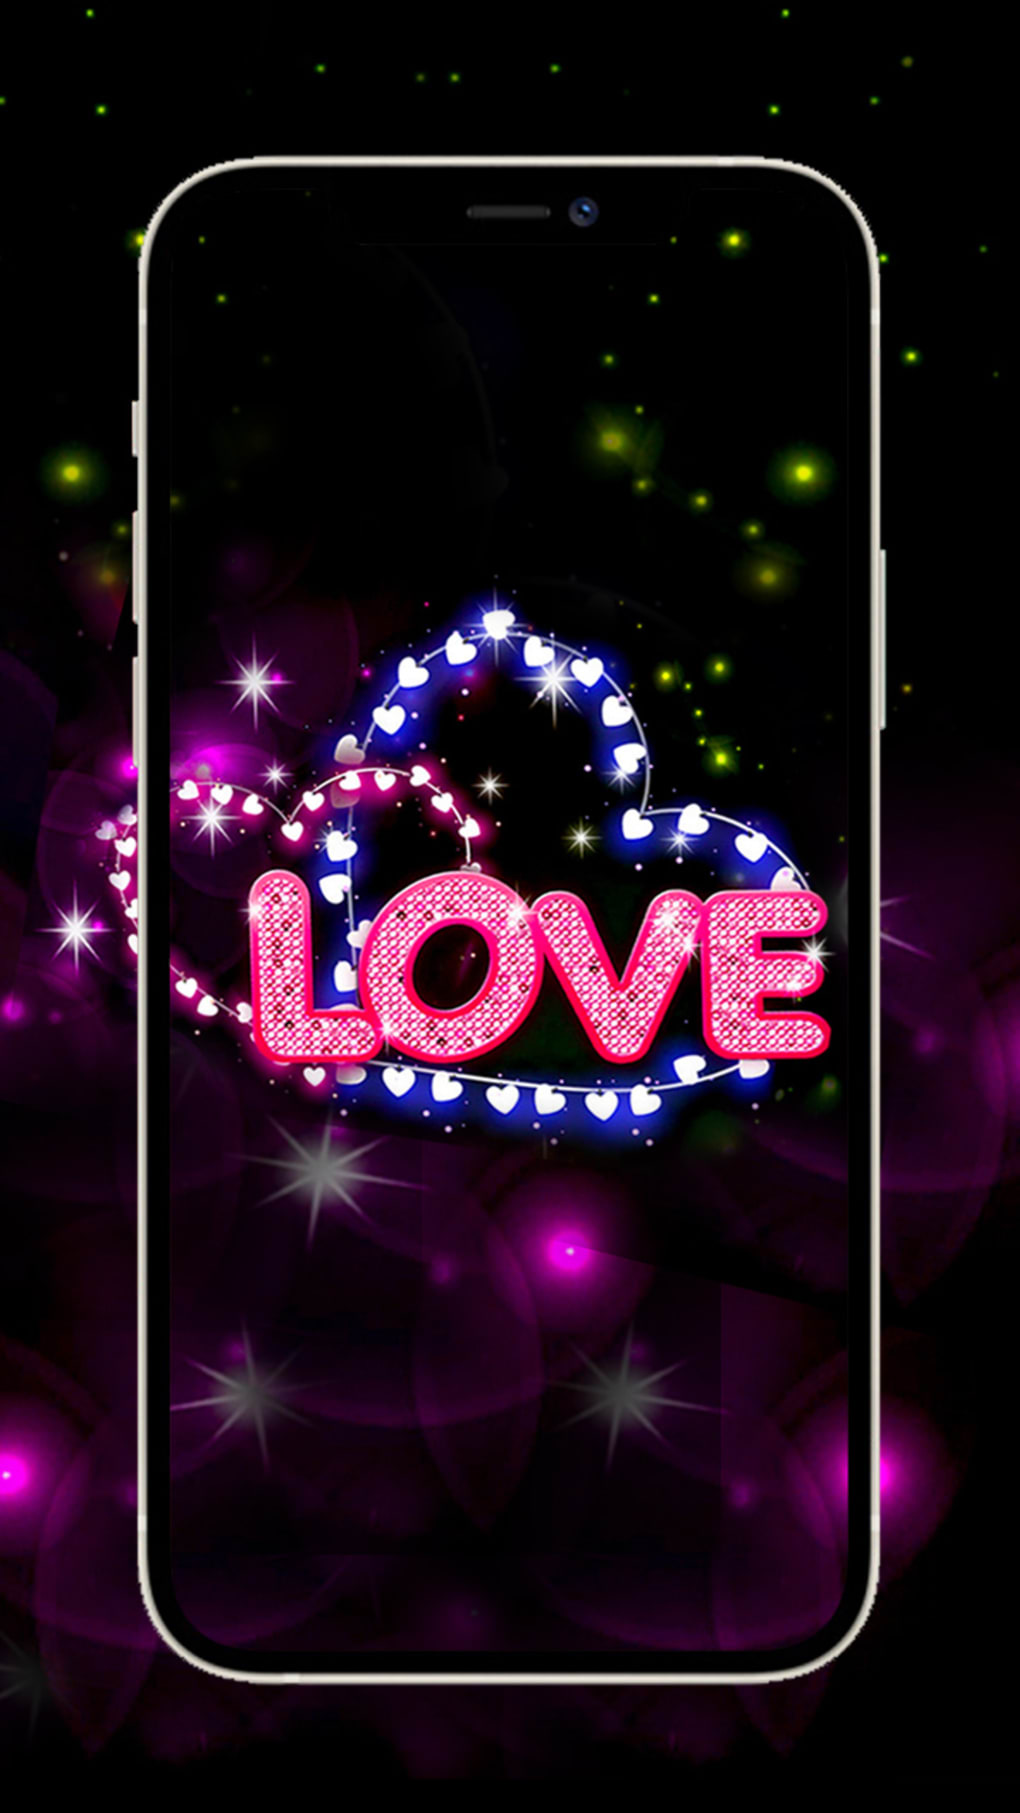 Cool Wallpaper Neon Love Theme – Apps on Google Play